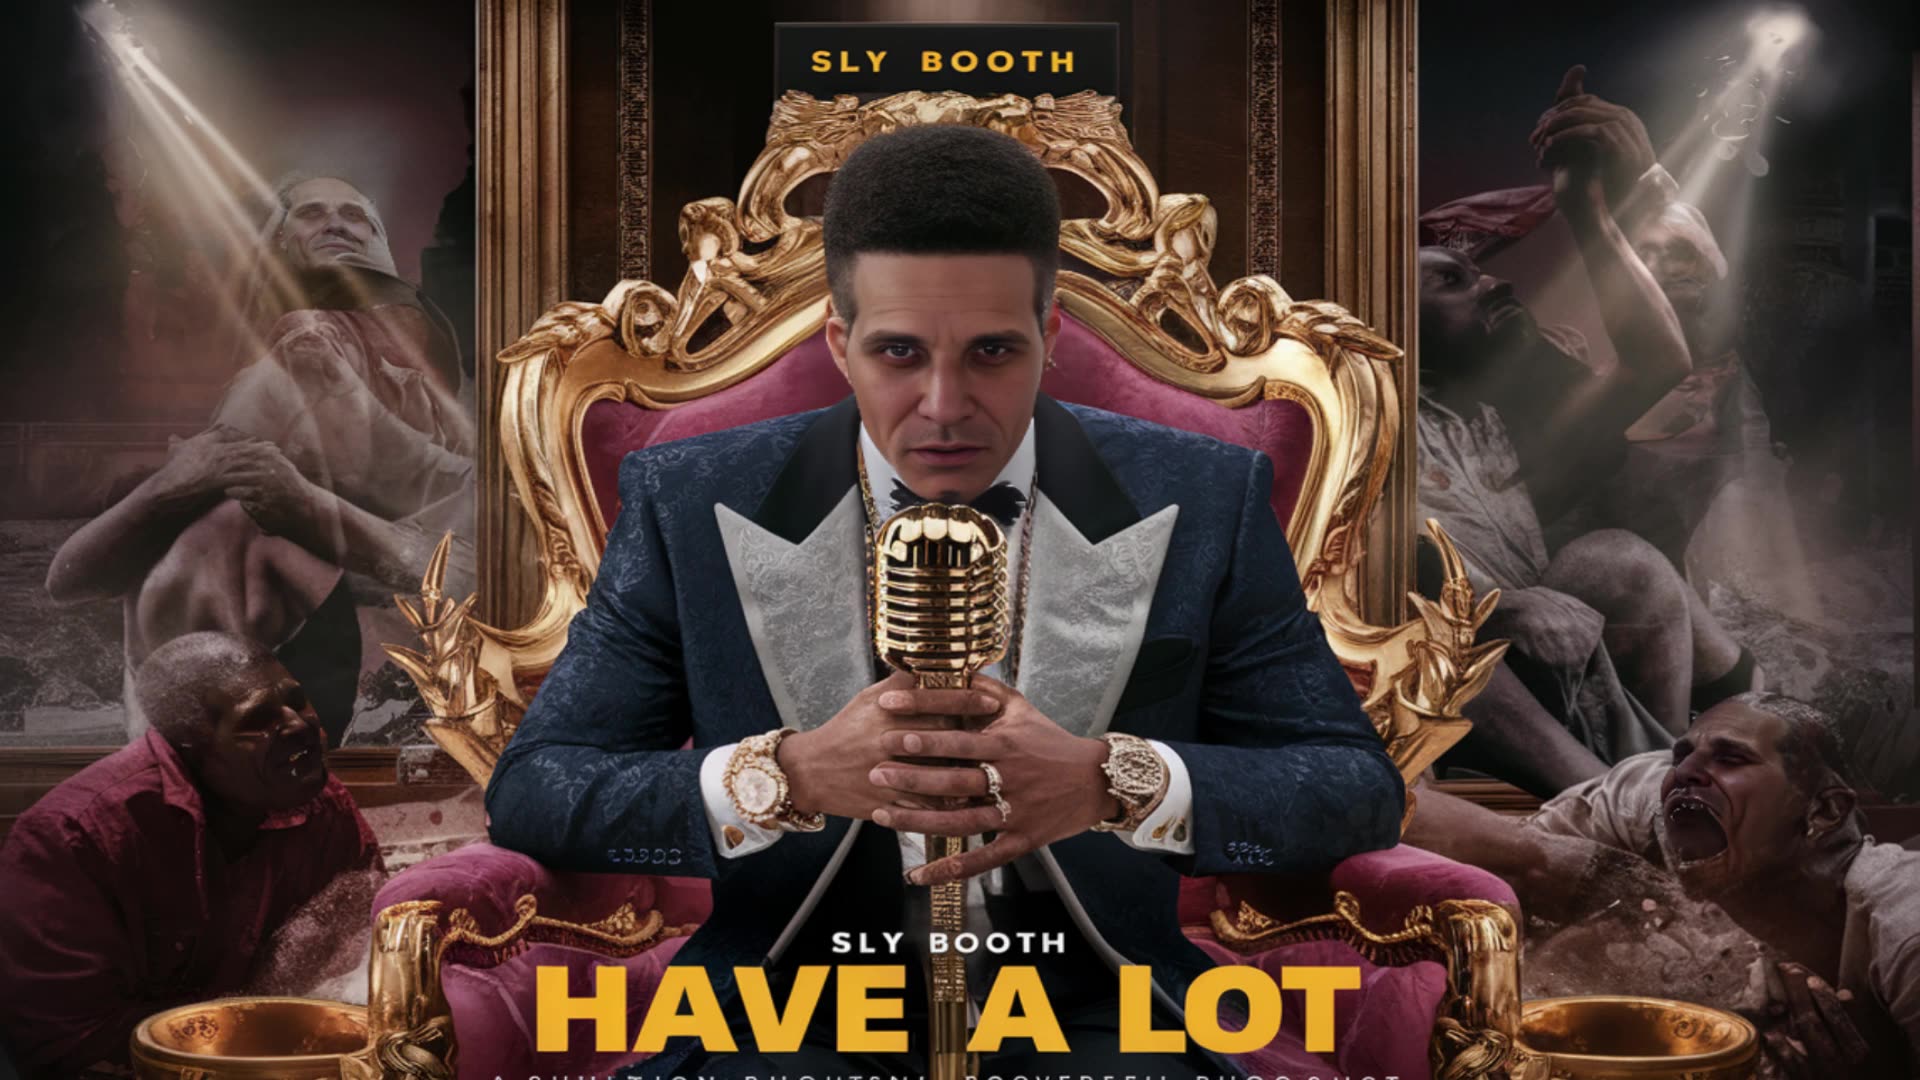 SLY BOOTH - HAVE A LOT